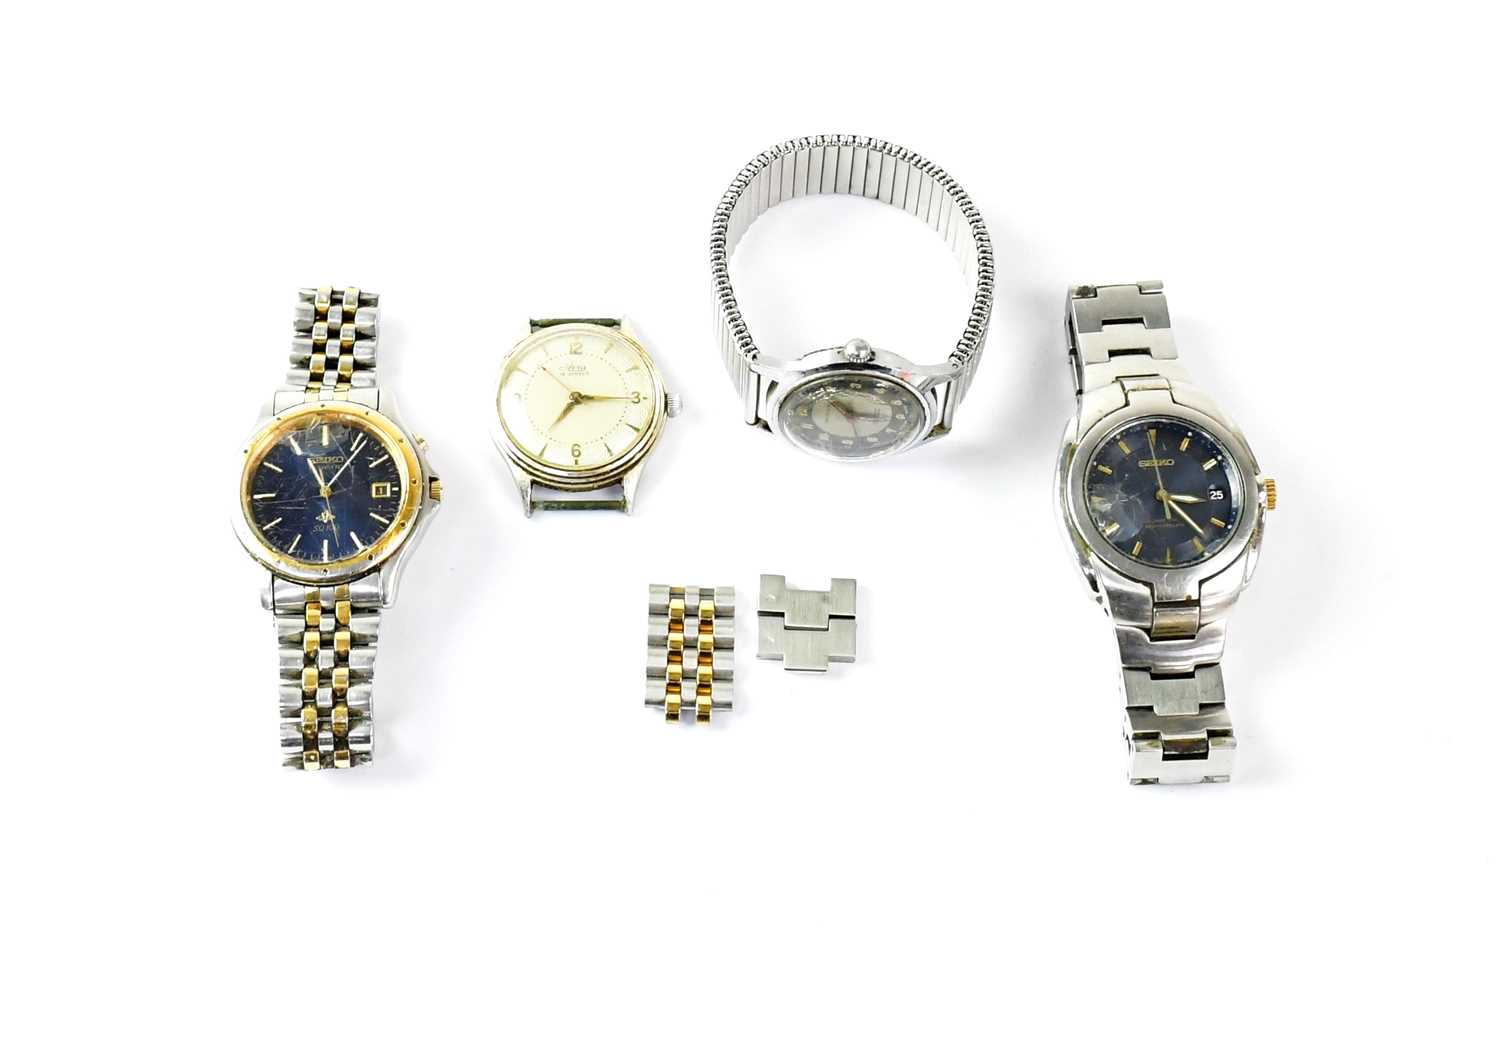 Four various wristwatches comprising a Seiko Kinetic SQ100, an Arcadia waterproof and shock